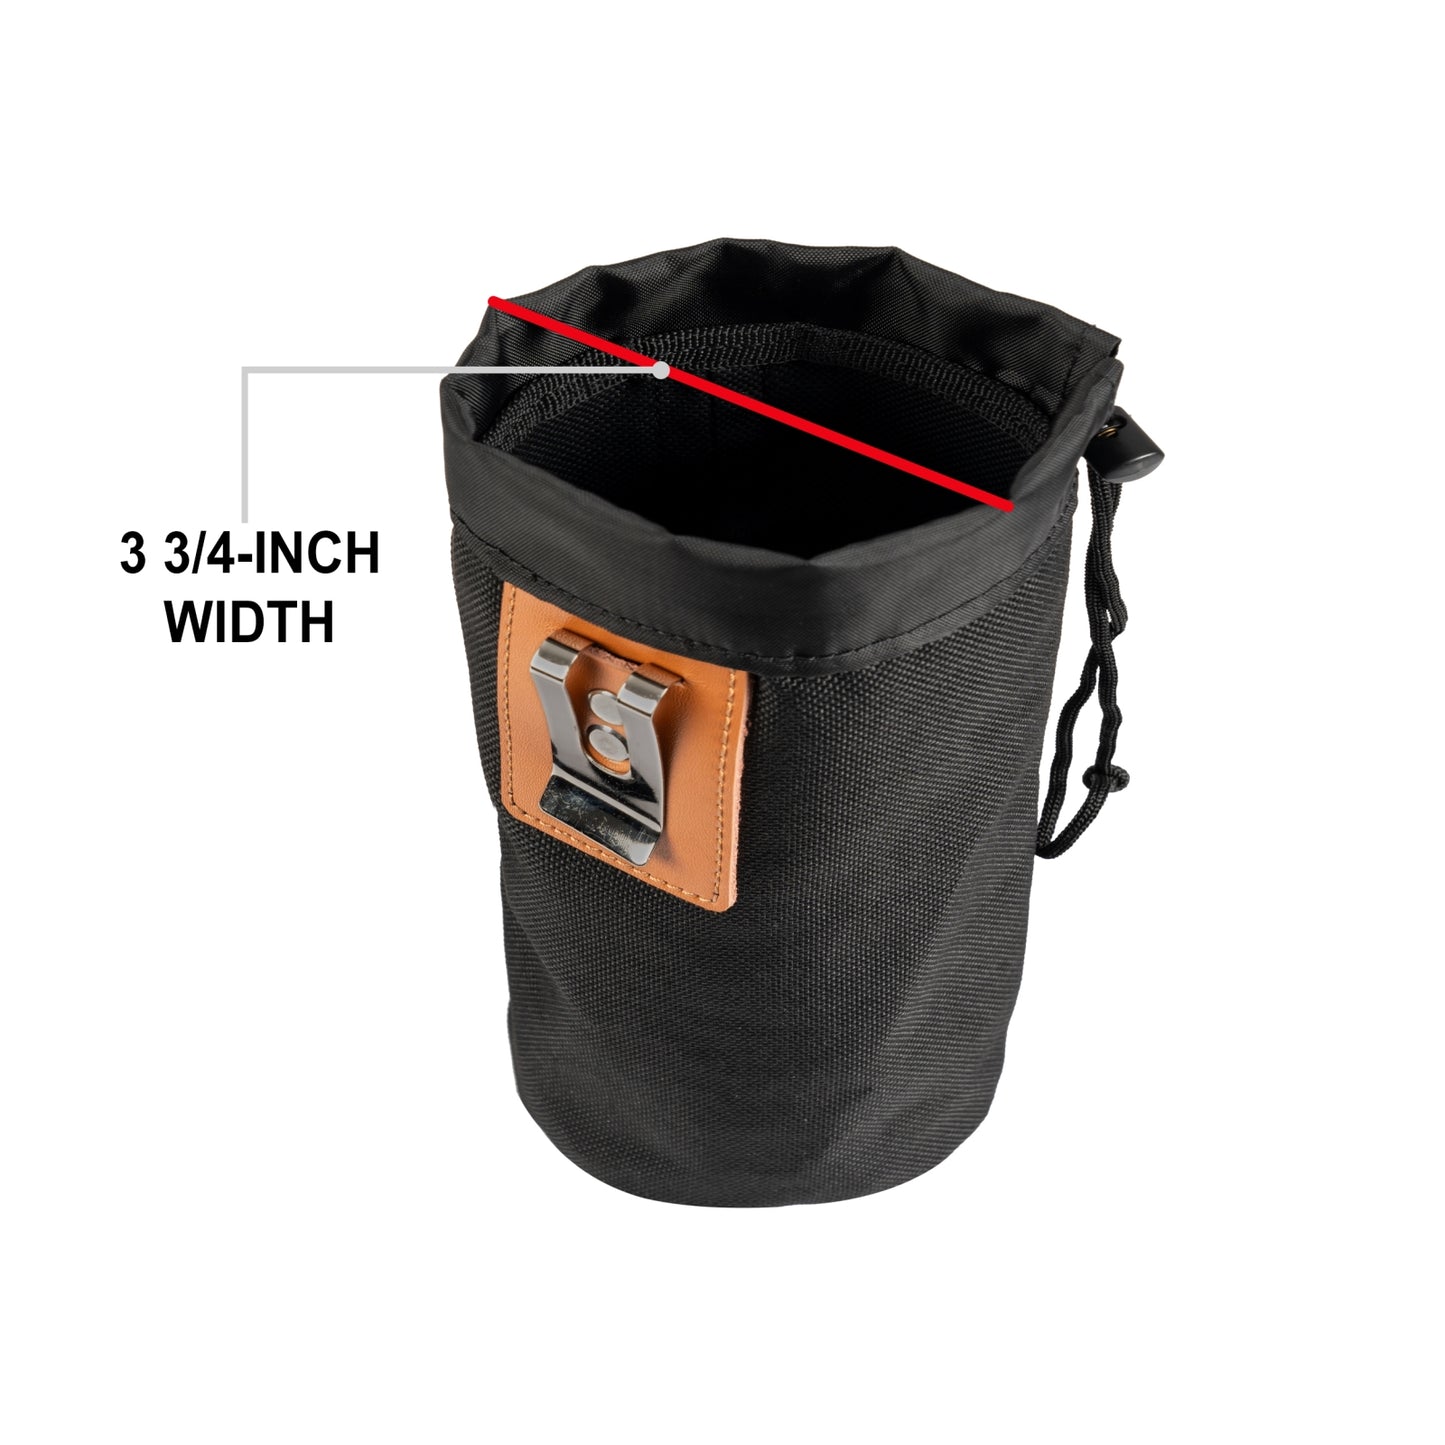 Perkins Builder Brothers 5-7/8-Inch Short Bolt Storage Pouch with Tool Belt Clip-On